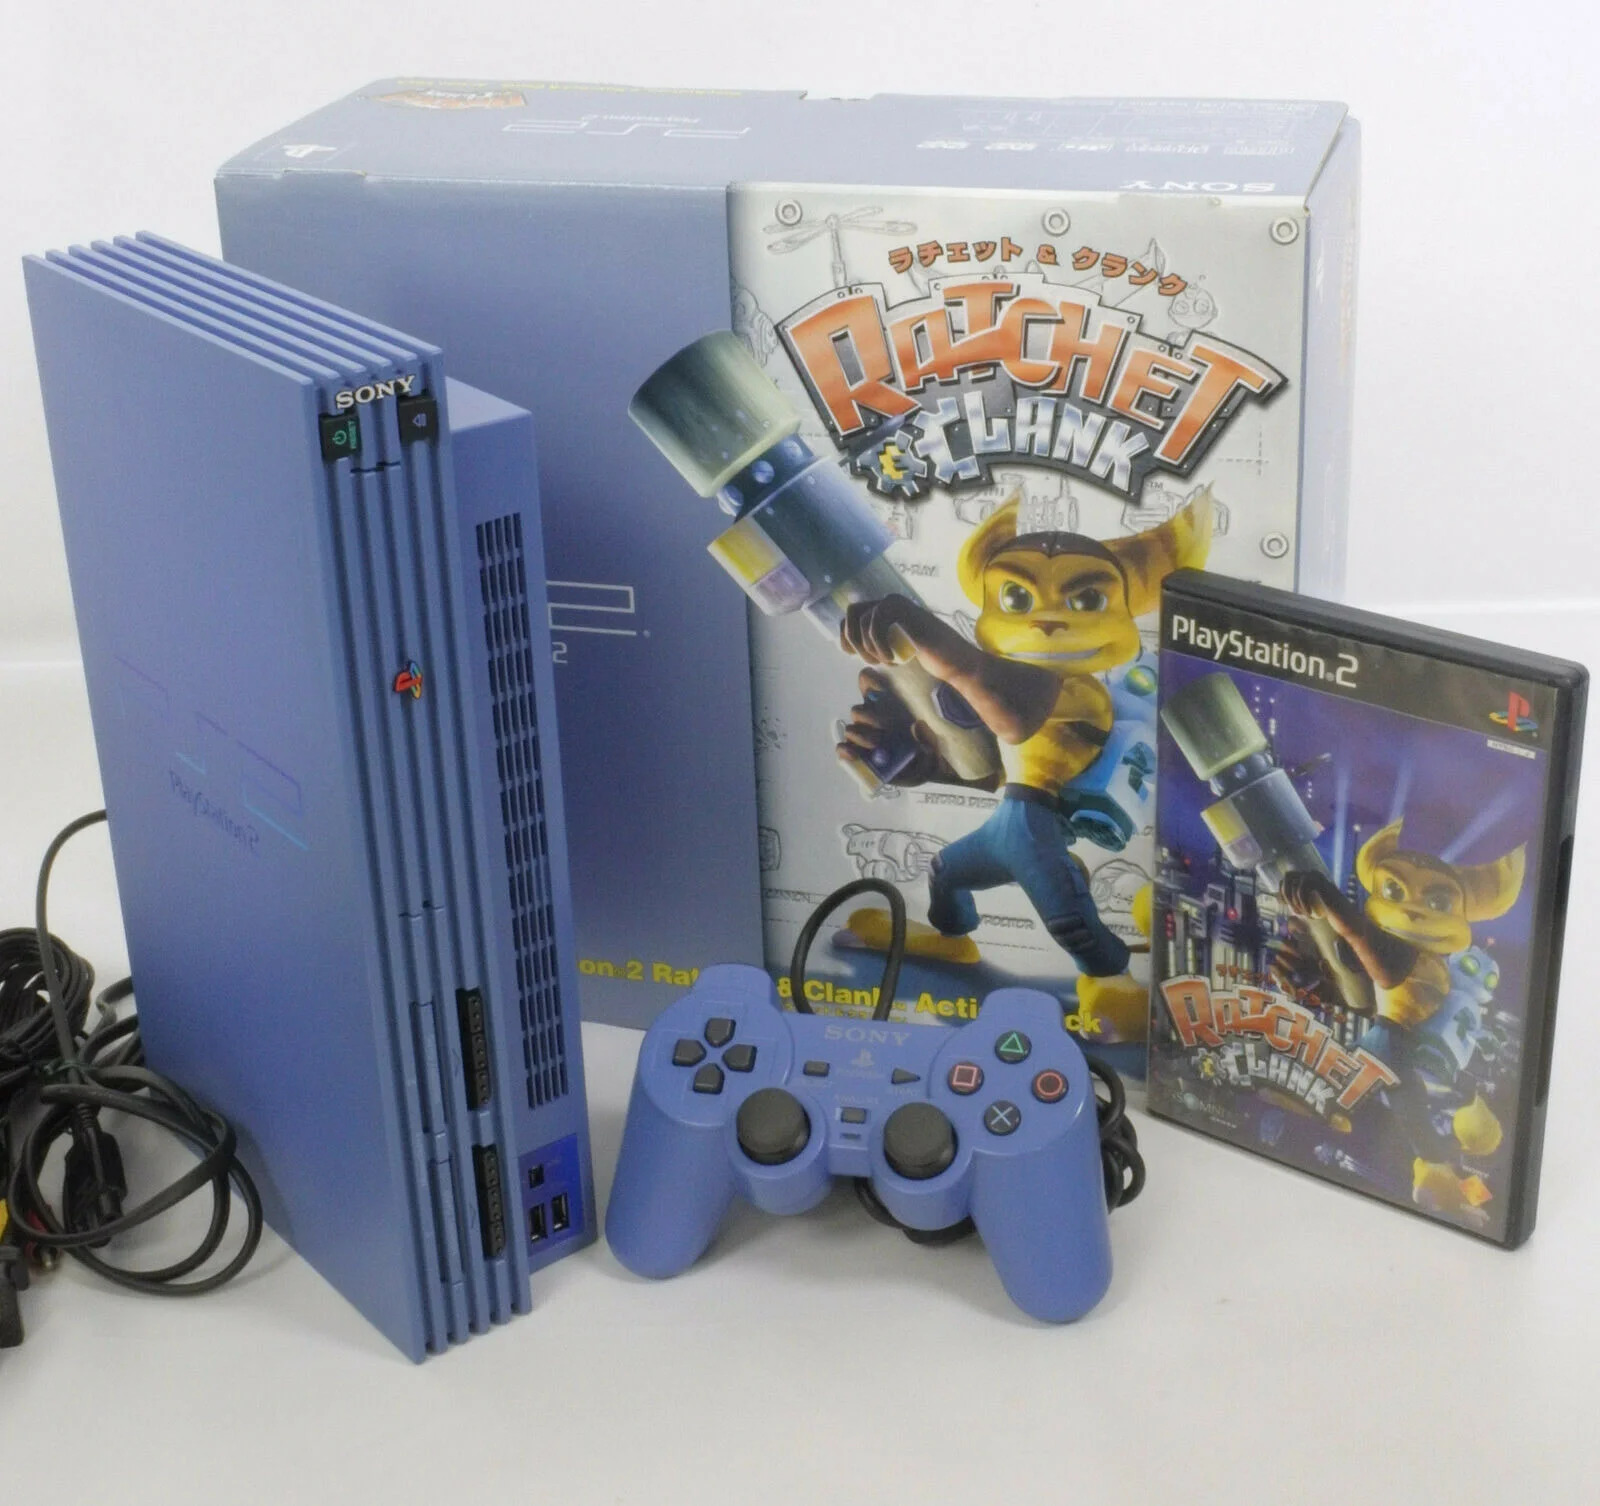 Sony Playstation 2 Ratchet and Clank Bundle - Consolevariations